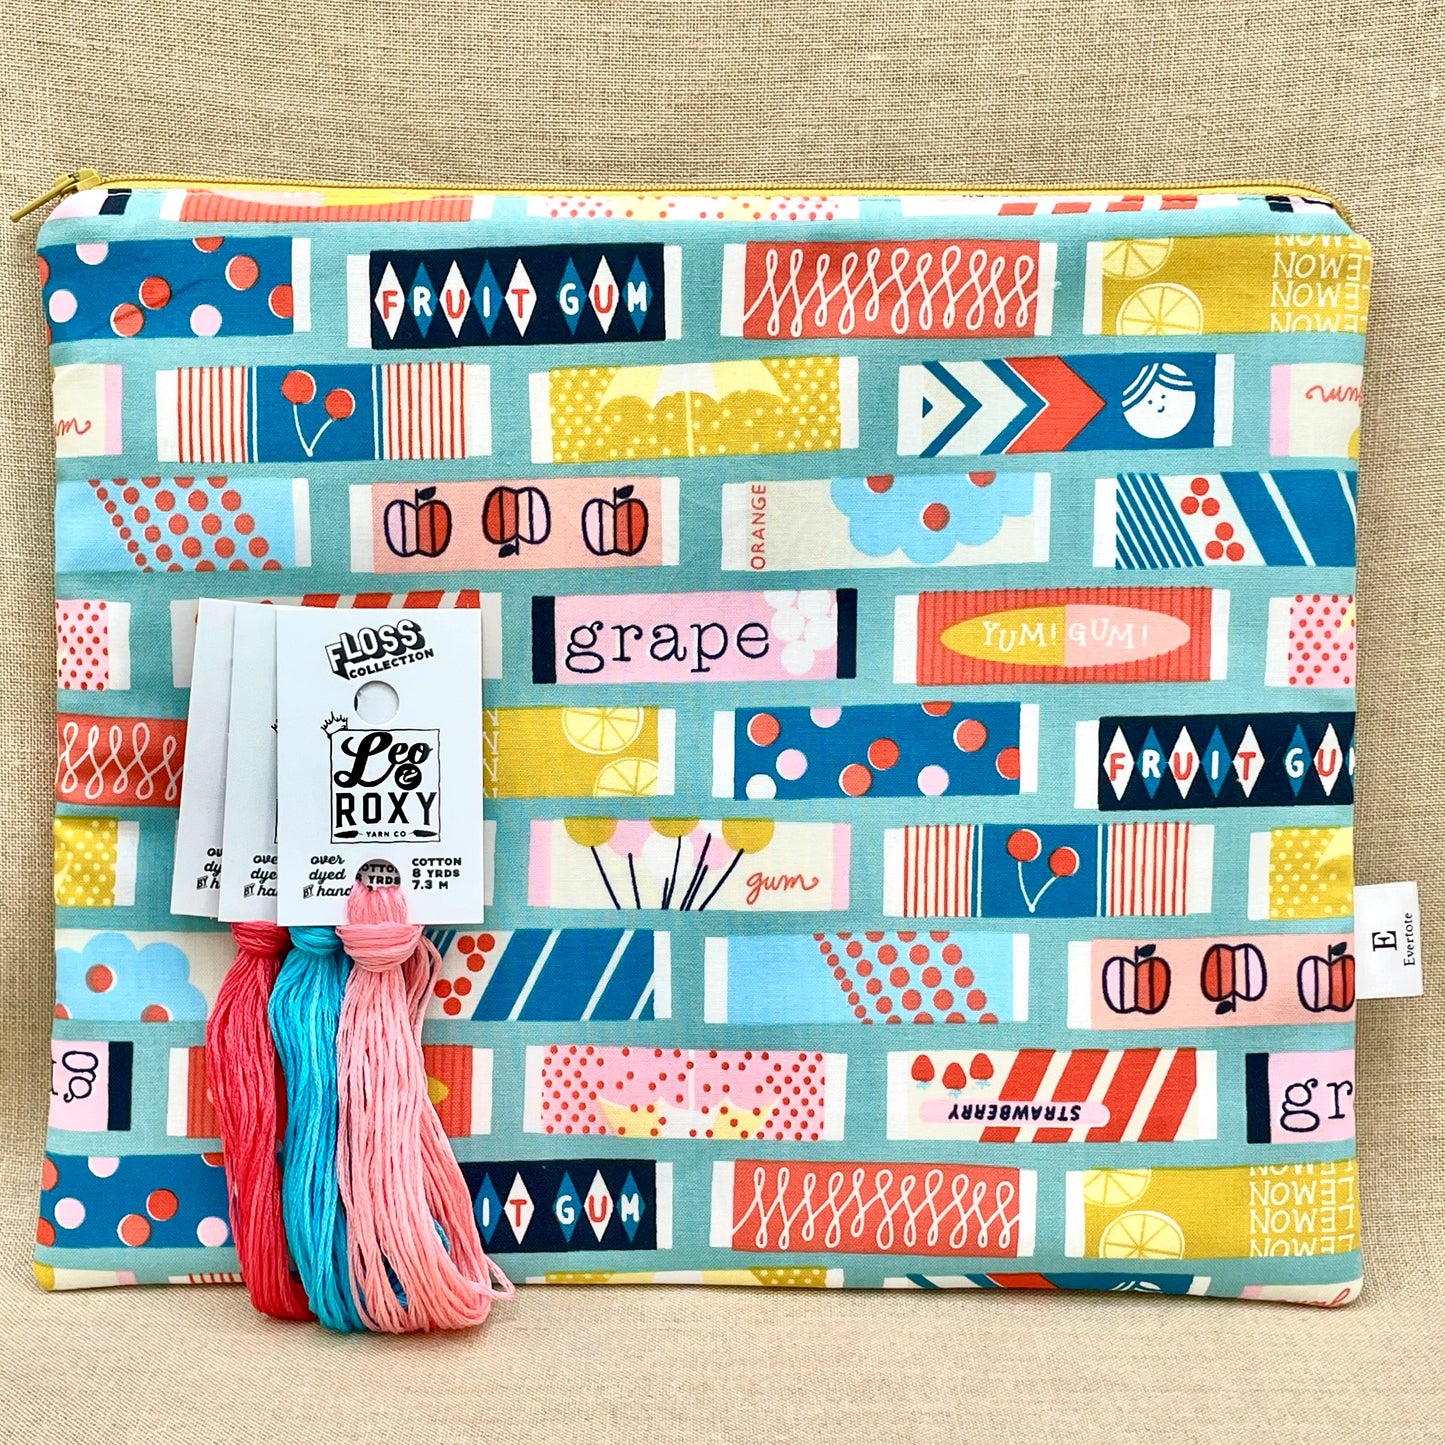 Annie Get Your Gum - Small Project Bag with Roxy Floss Co. Set